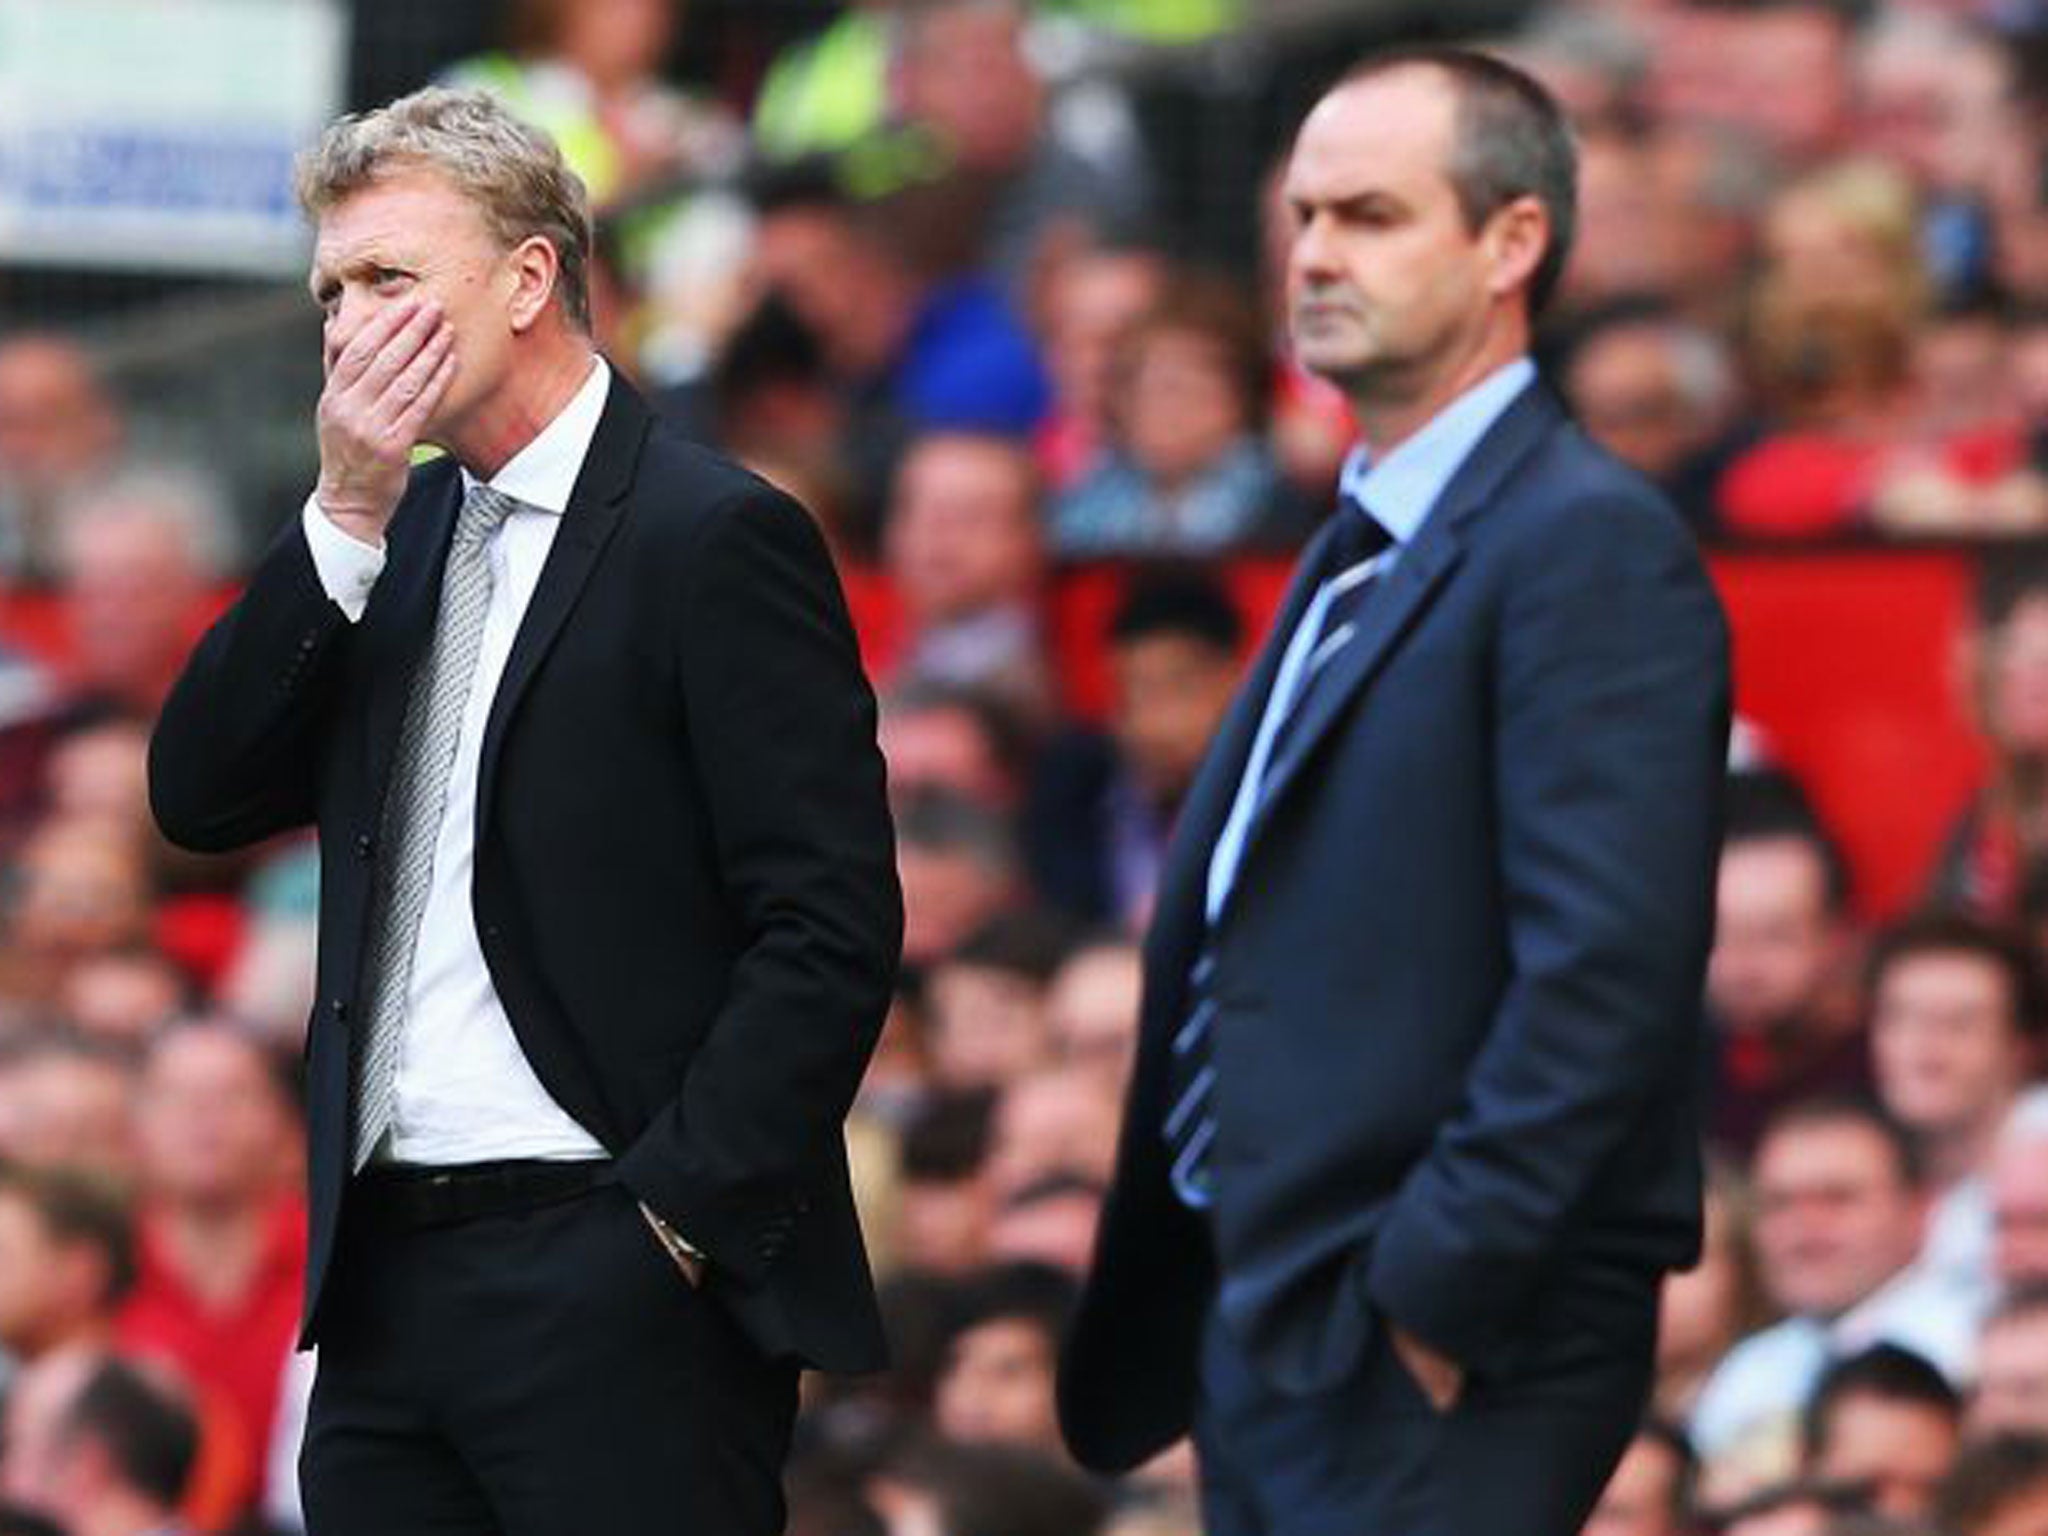 A face-palm moment for David Moyes as Steve Clarke looks on